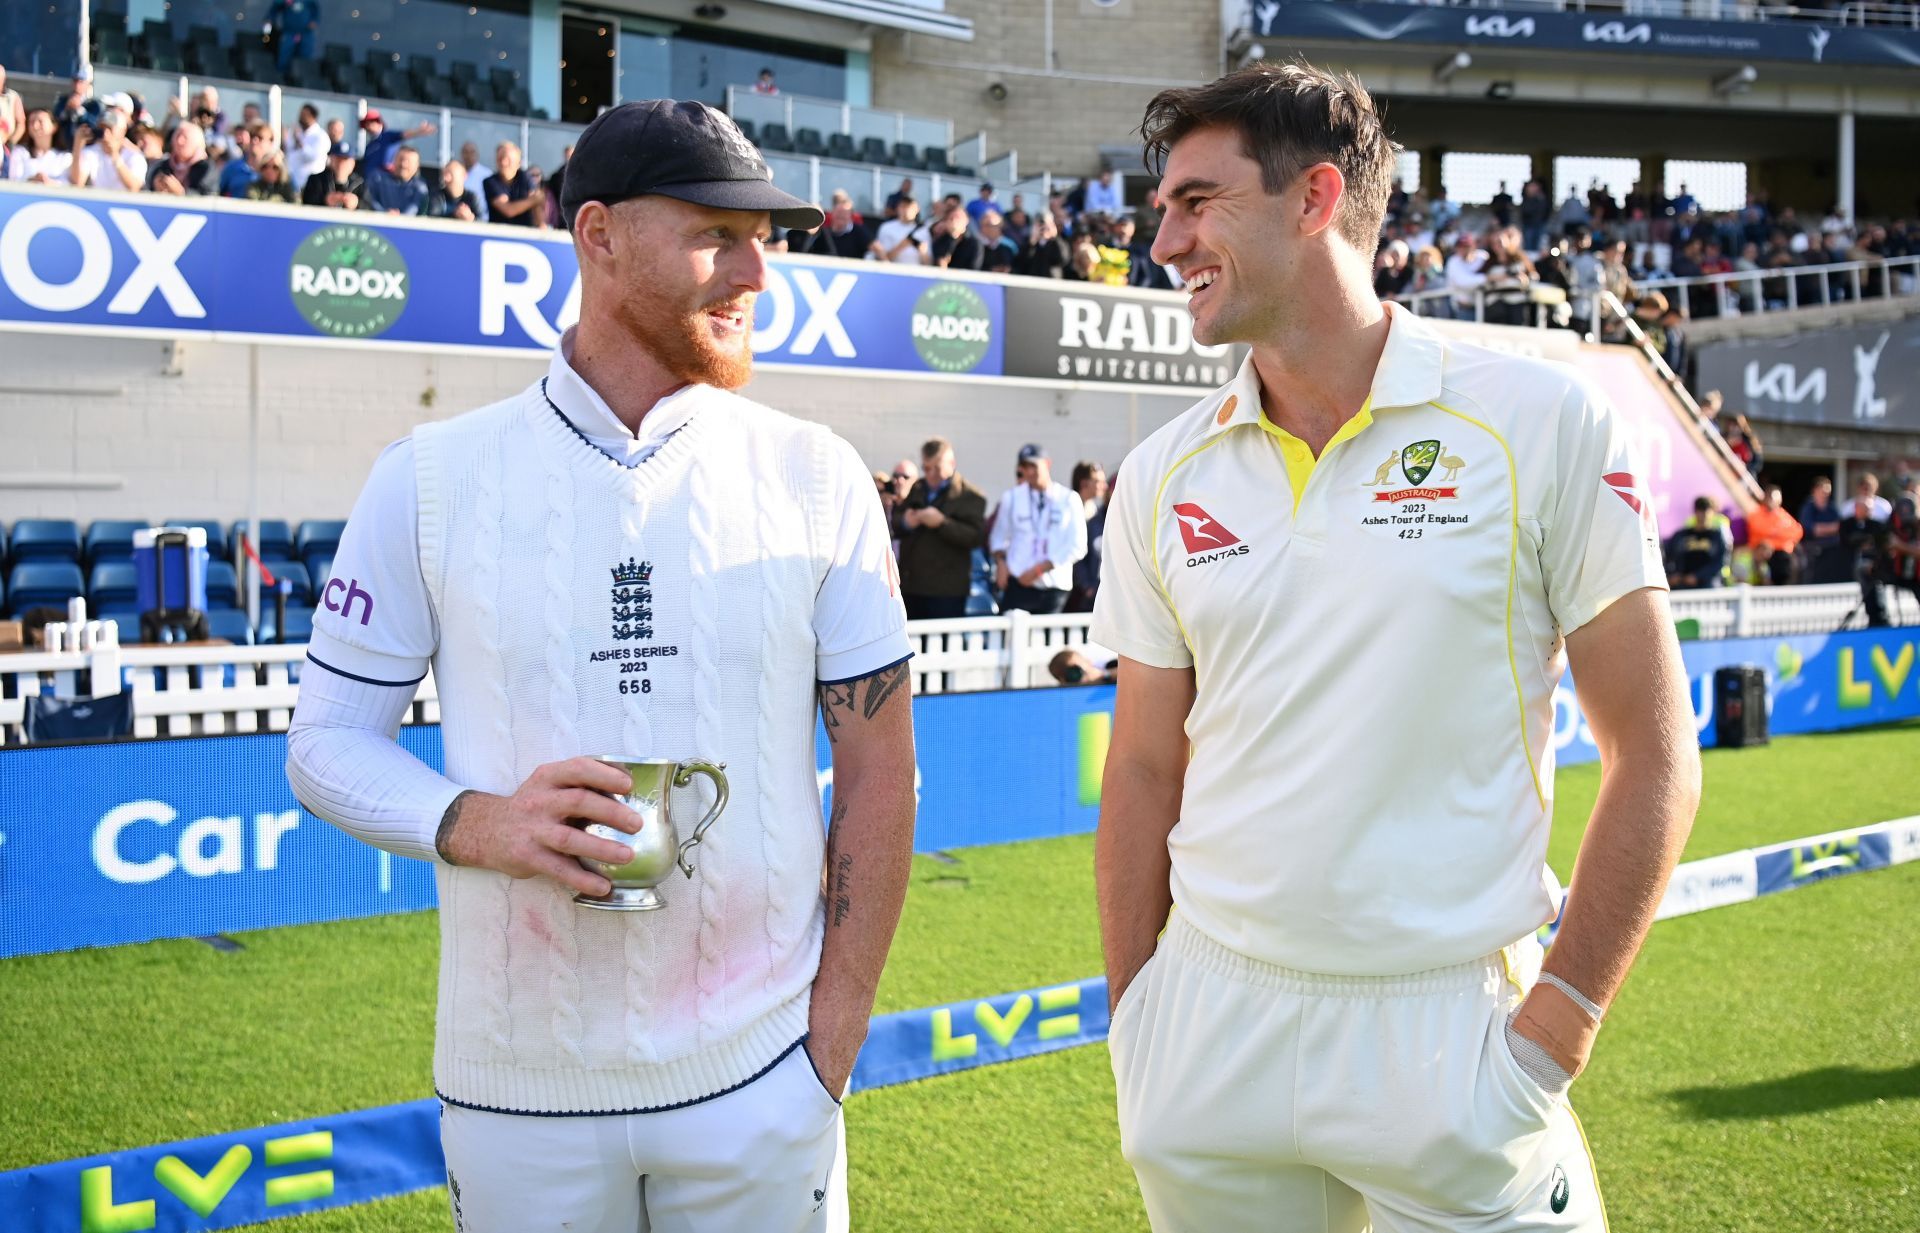 The Ashes are a much-awaited series across the world. [P/C: Getty]